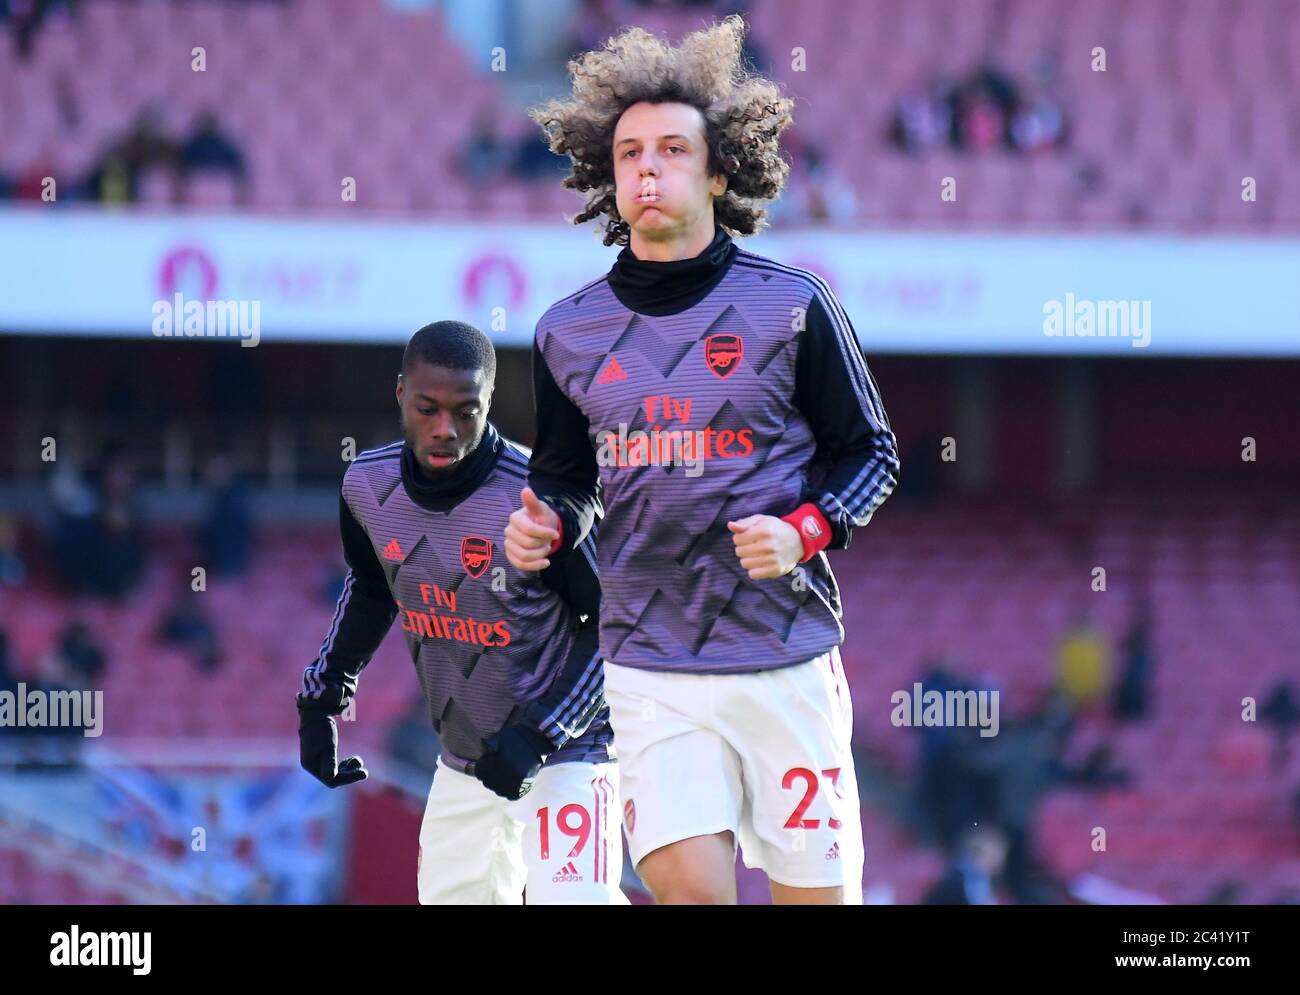 LONDON, ENGLAND - JANUARY 18, 2020: David Luiz of Arsenal pictured ahead of the 2019/20 Premier League game between Arsenal FC and Sheffield United FC at Emirates Stadium. Stock Photo